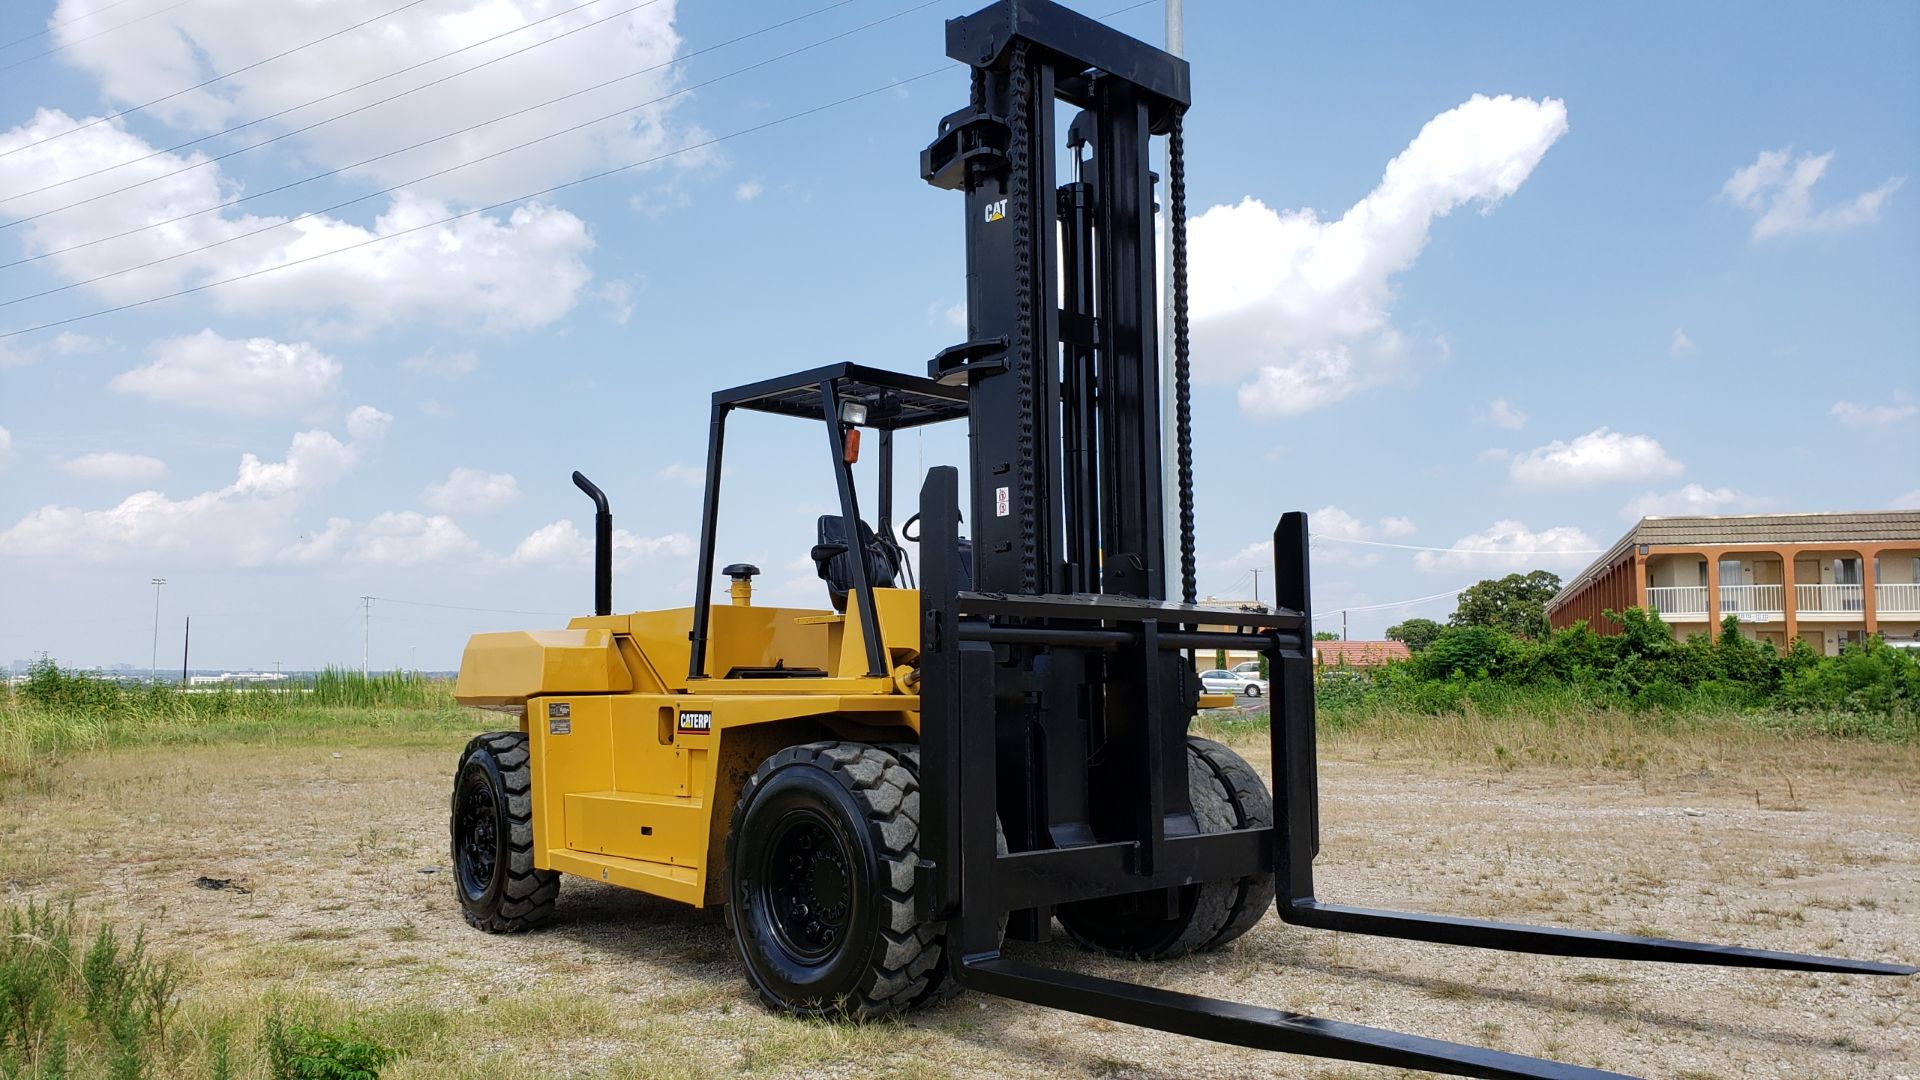 FORKLIFT, CATERPILLAR 33,000 LB. CAP. MDL. DP150, new 2005, Mitsubishi 6 cyl. diesel engine, 8' - Image 5 of 13